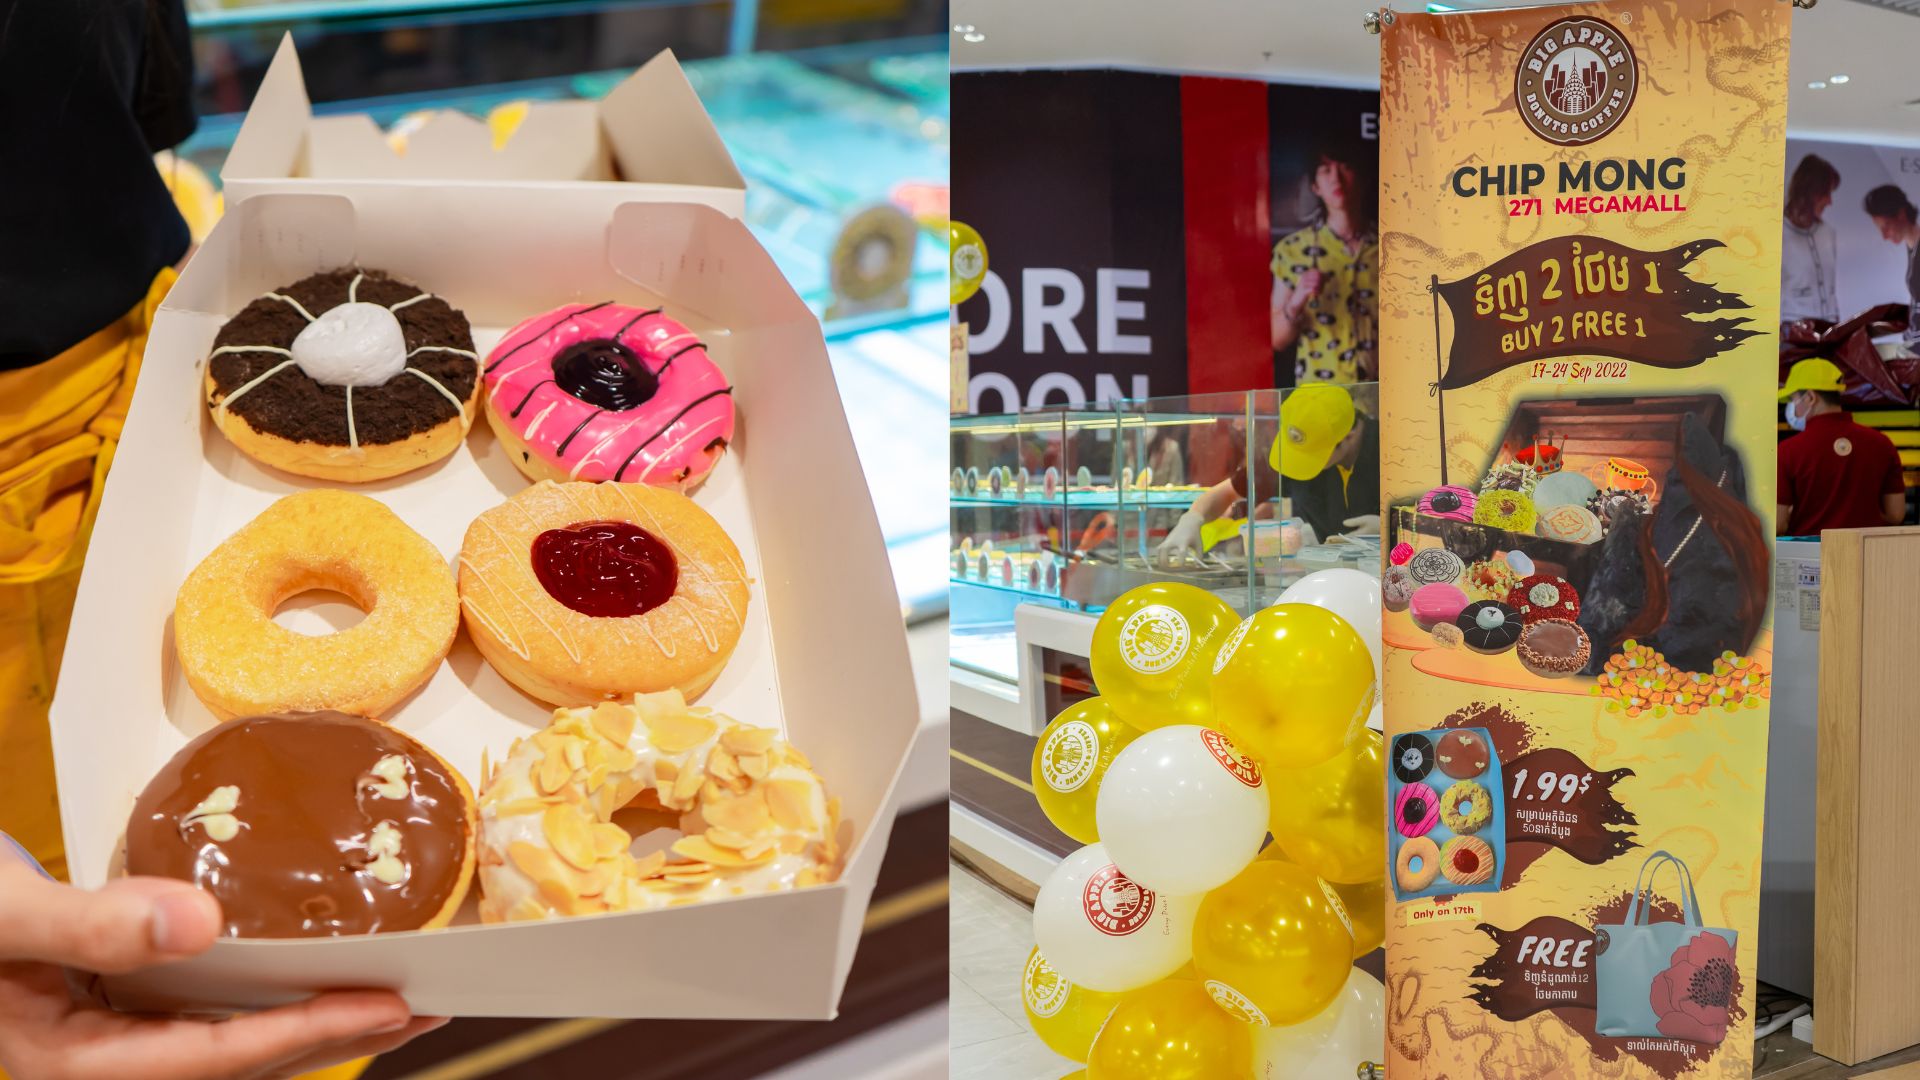 Biggest promotions from the newest Big Apple Donut branch at Chip Mong 271 Megamall!